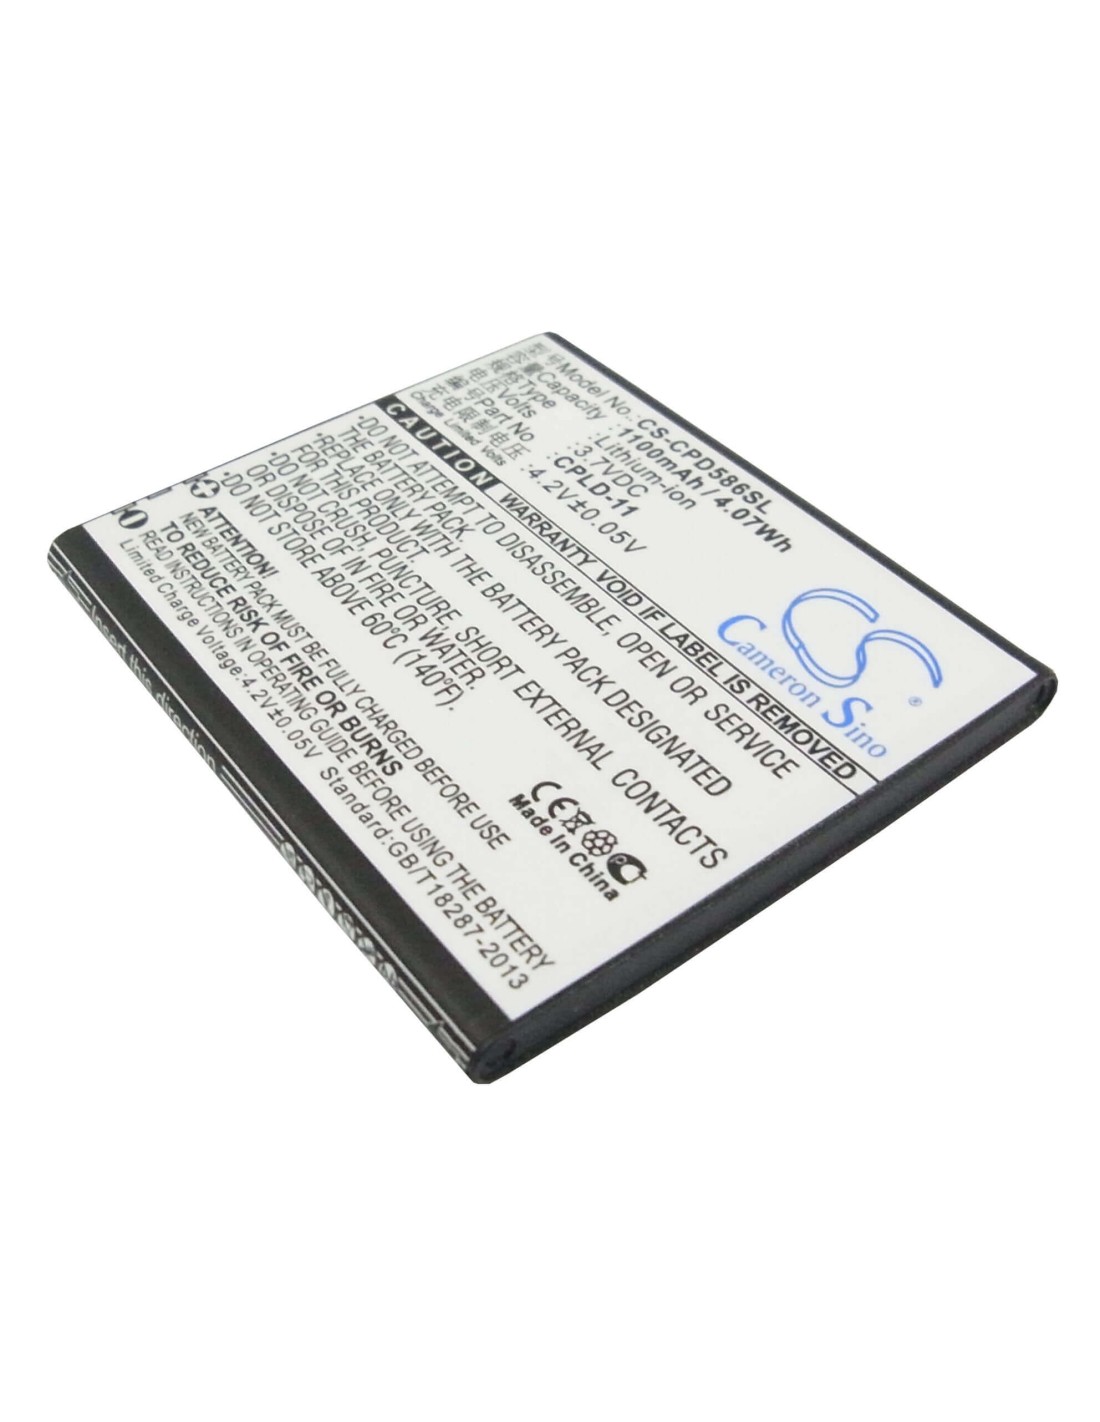 Battery for Coolpad 5860S, 5910, 7268 3.7V, 1100mAh - 4.07Wh